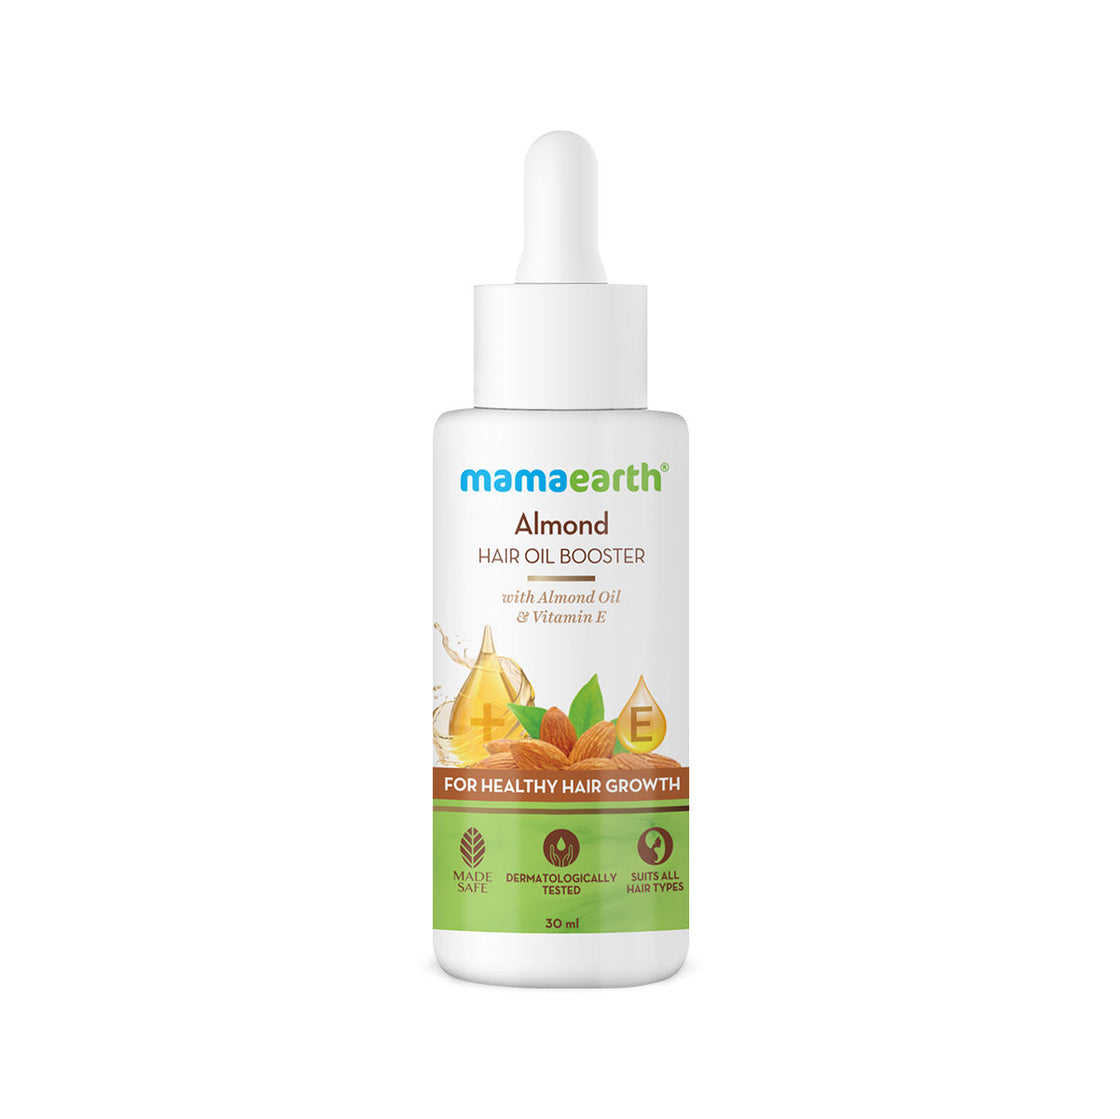 Mamaearth Almond Hair Oil Booster With Almond Oil & Vitamin E & For Healthy Hair Growth